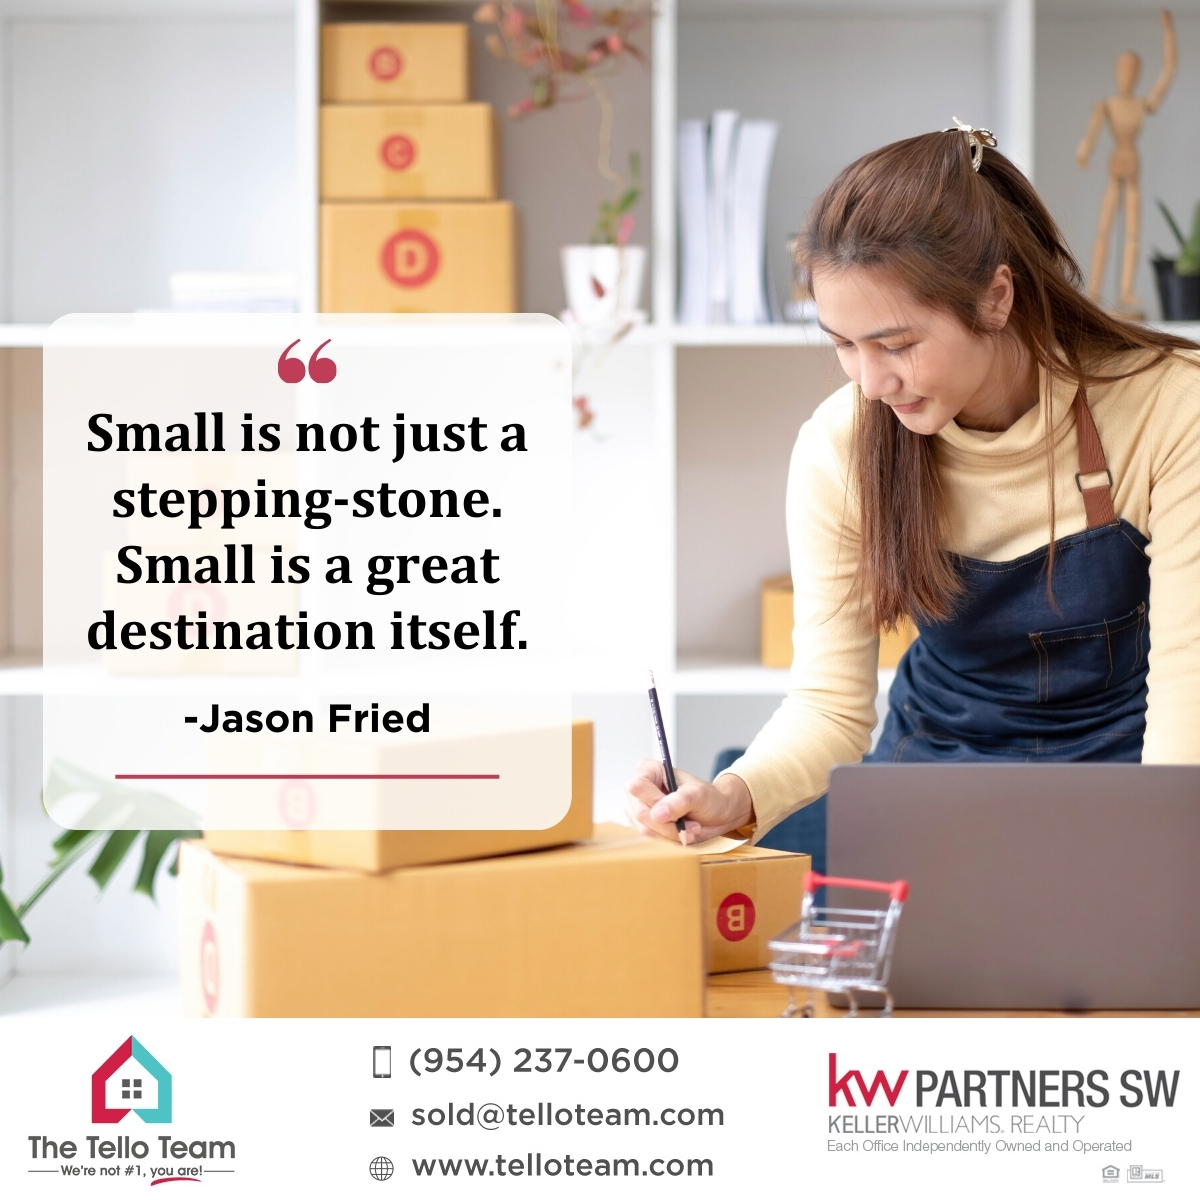 “Small is not just a stepping-stone. Small is a great destination itself.” - Jason Fried

Looking to buy/sell a house? Contact a realtor you can trust 📲+1 954-237-0600

#realestatebroker #realestatemiami #realestateflorida #floridarealtor #floridarealtors #floridarealestate